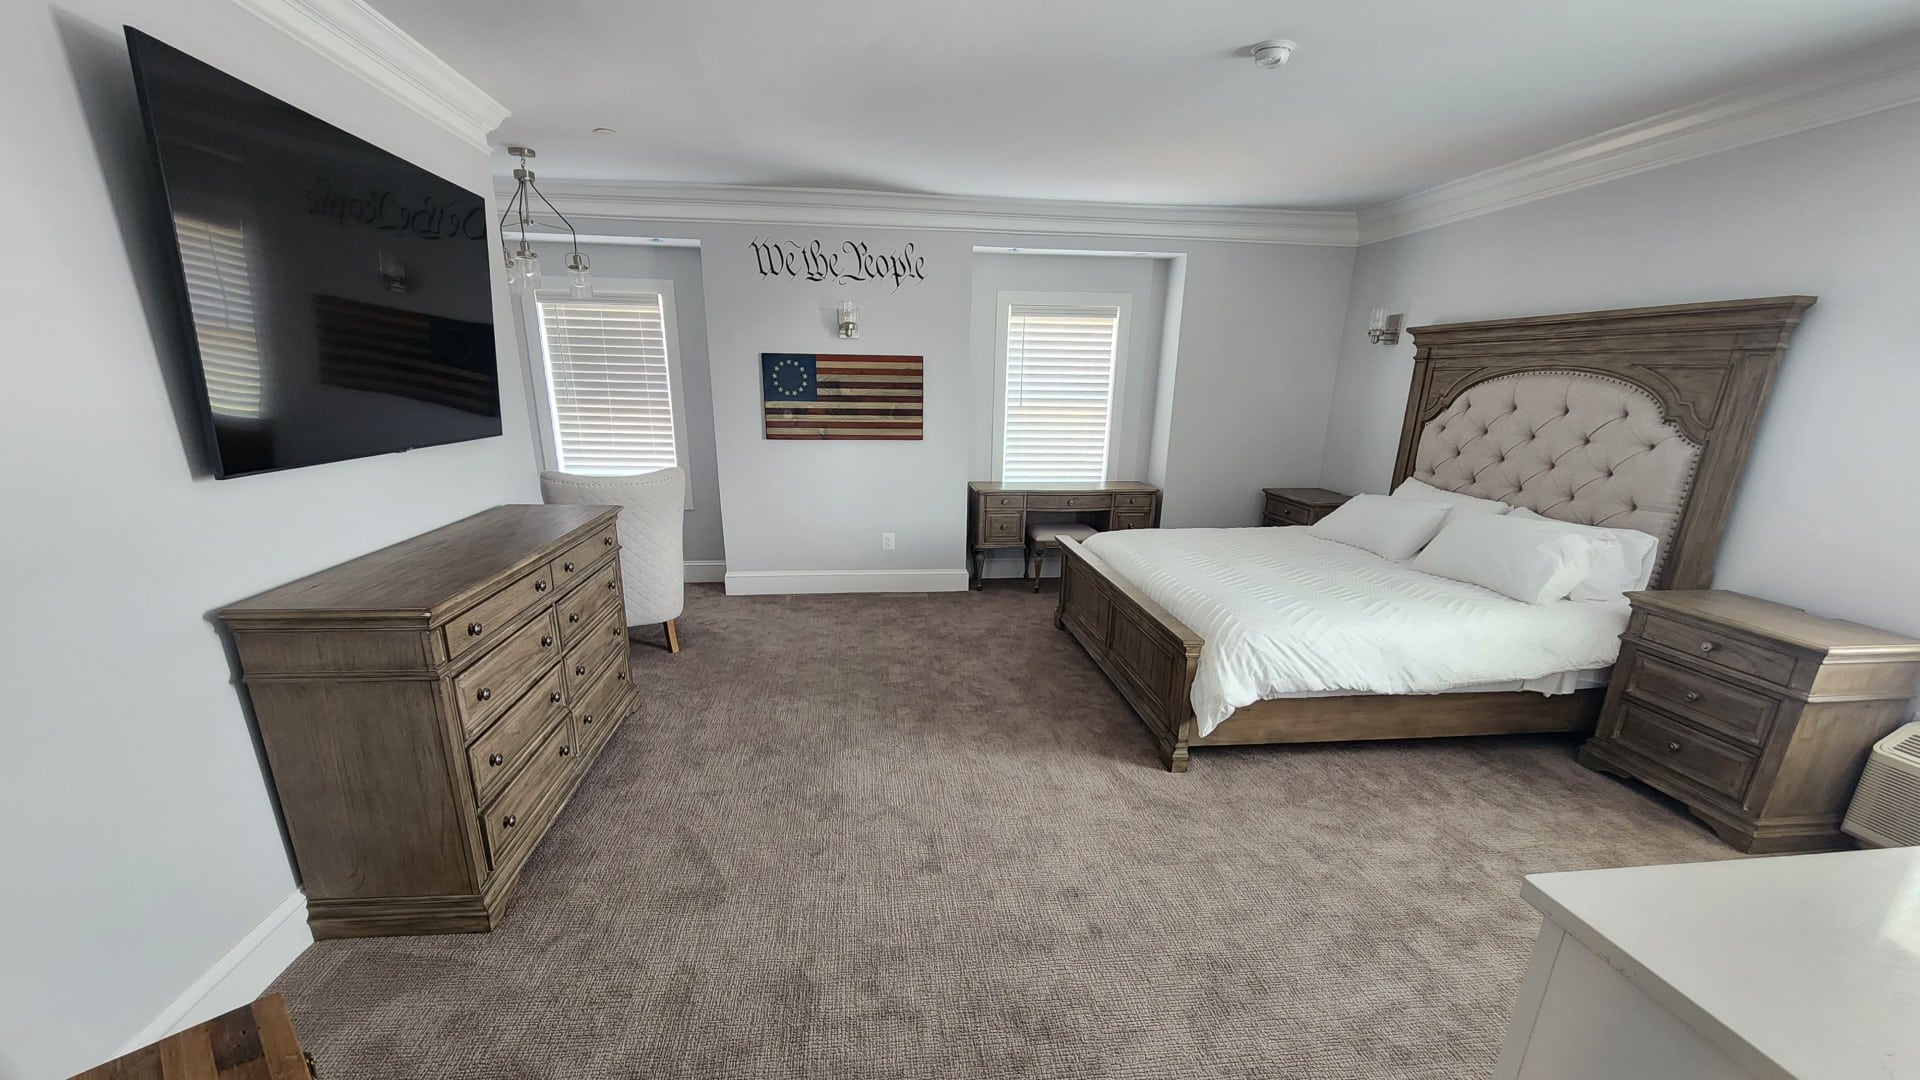 Large bedroom with king bed, TV over a dresser, two side tables and windows with blinds